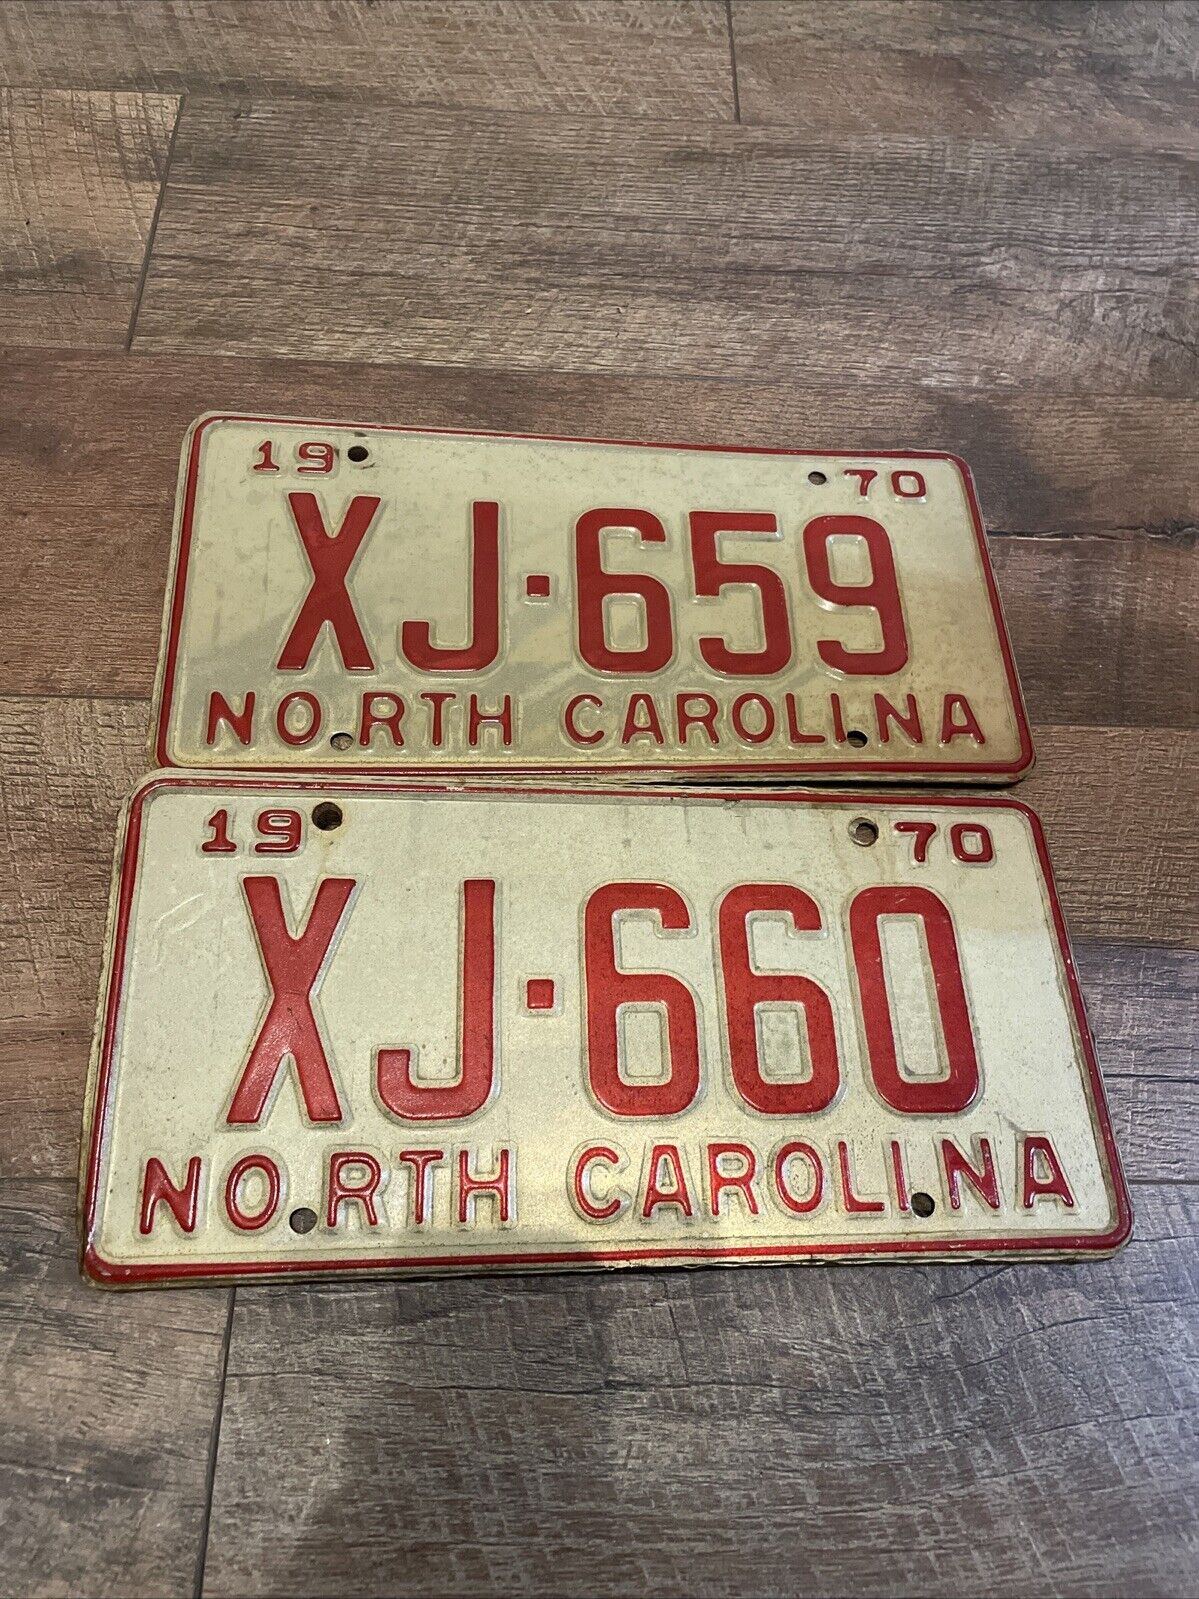 1970 Sequential Low Number North Carolina License Plates - “XJ-659/660”